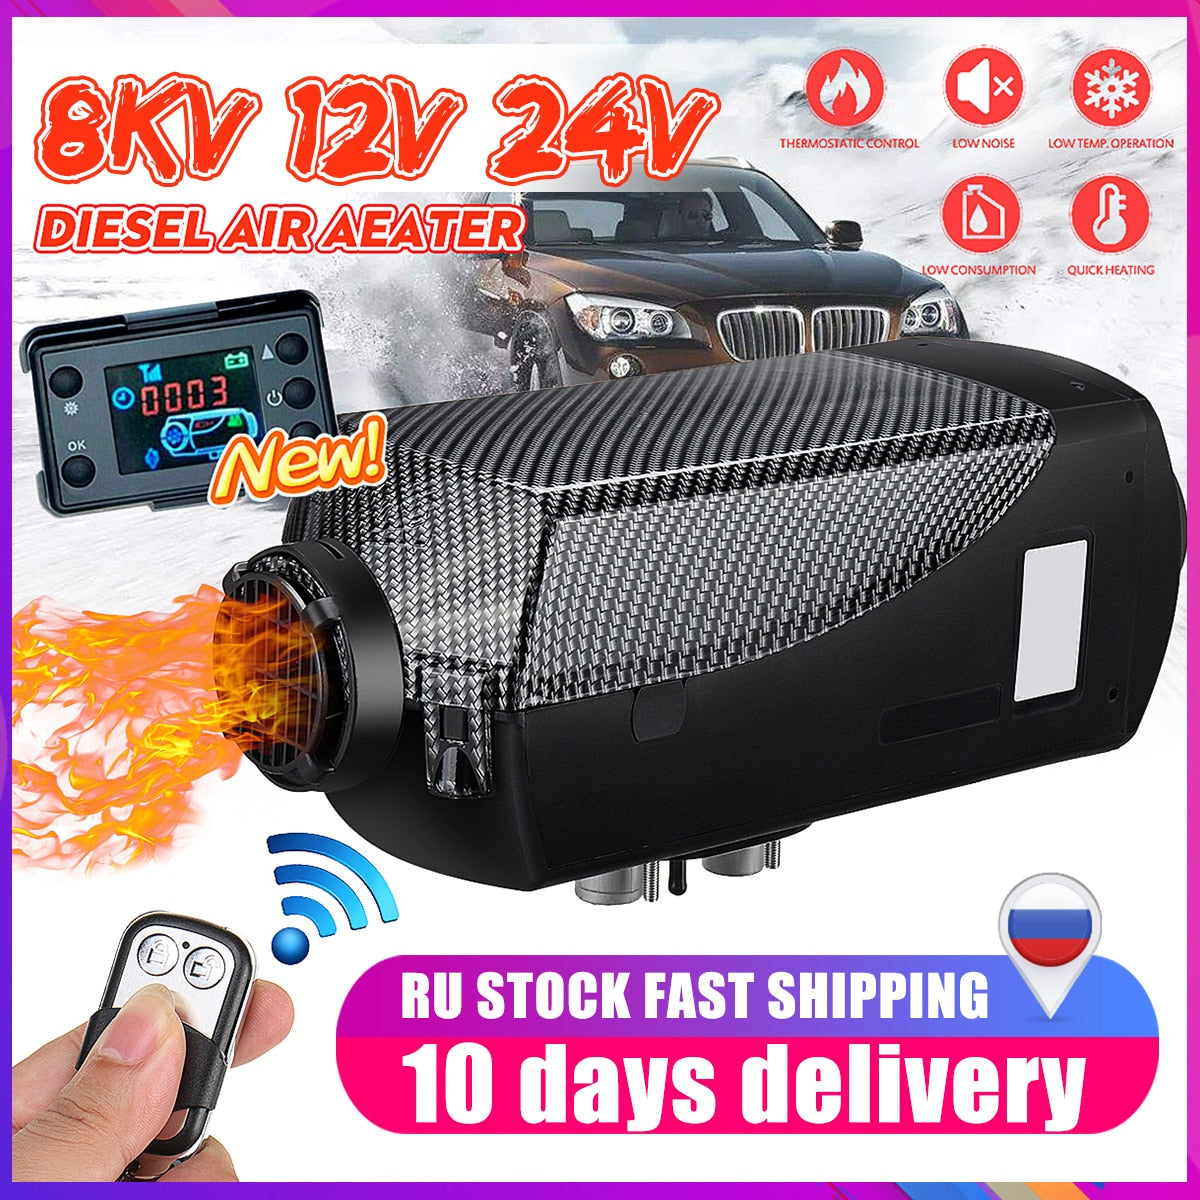 Car Heater 8KW 12V 24V Air Diesel Heater 2 Air Outlet LCD Monitor + 15L Tank Remote Control for RV Boats Trailer Truck Motorhome